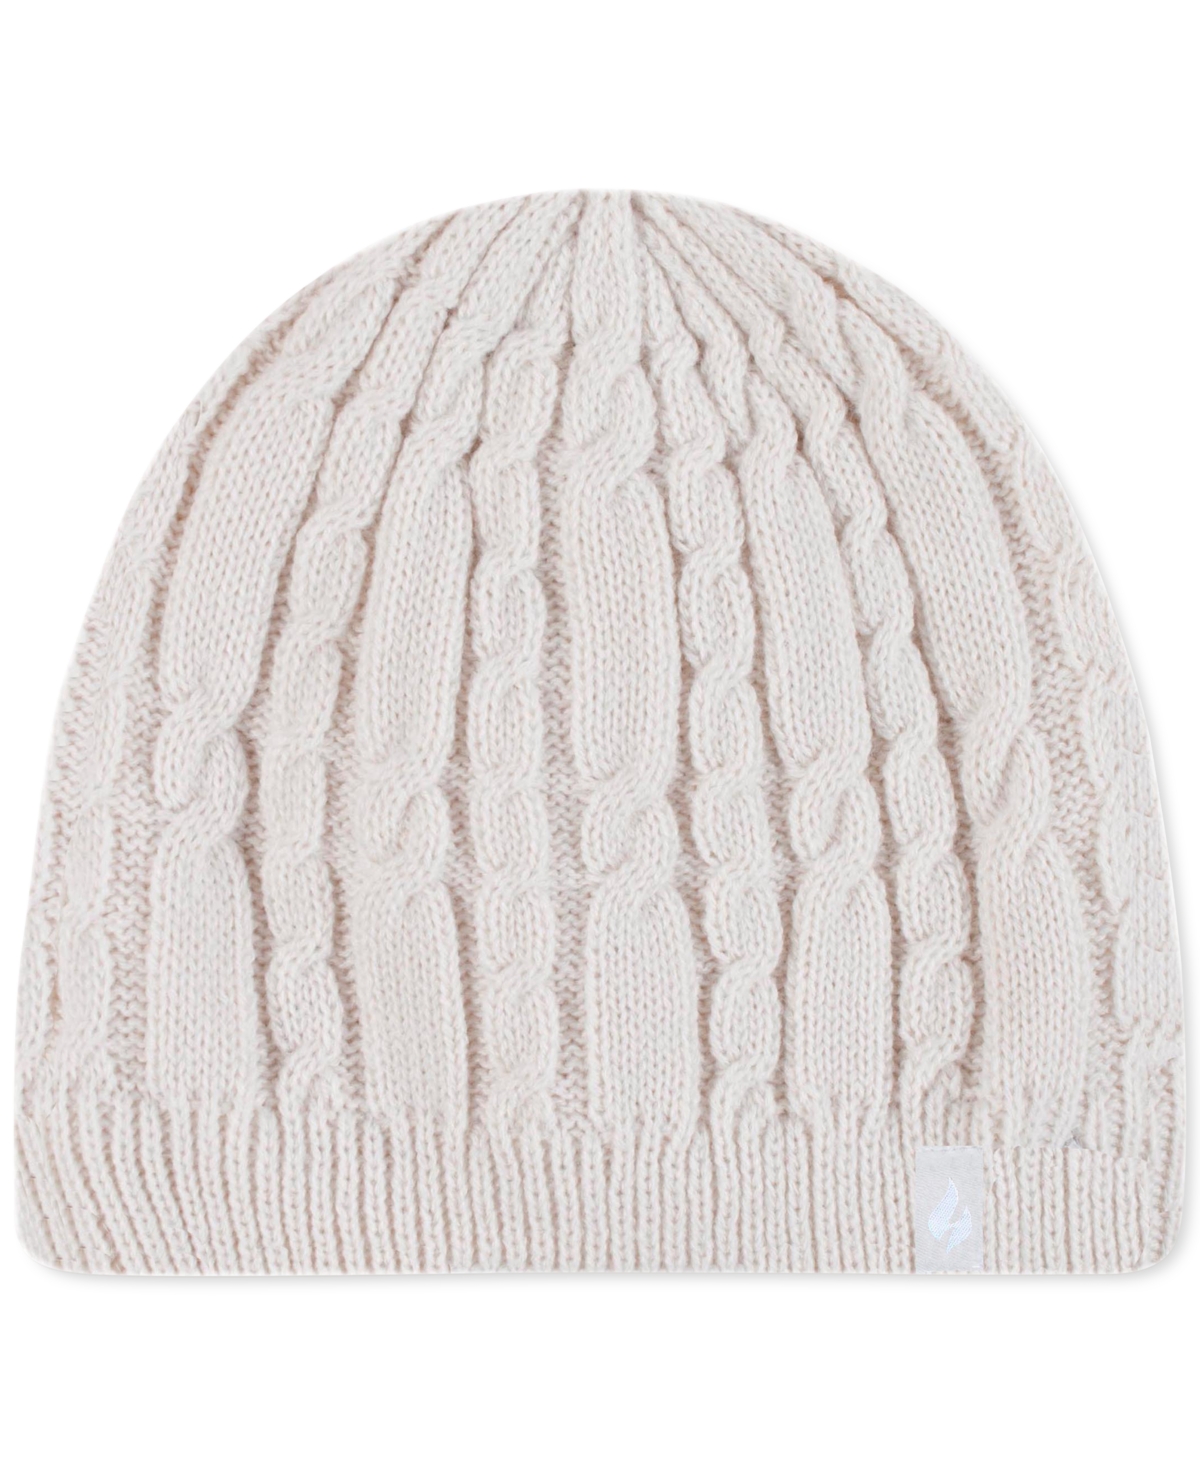 Women's Alesund Cable-Knit Hat - Cloud Grey